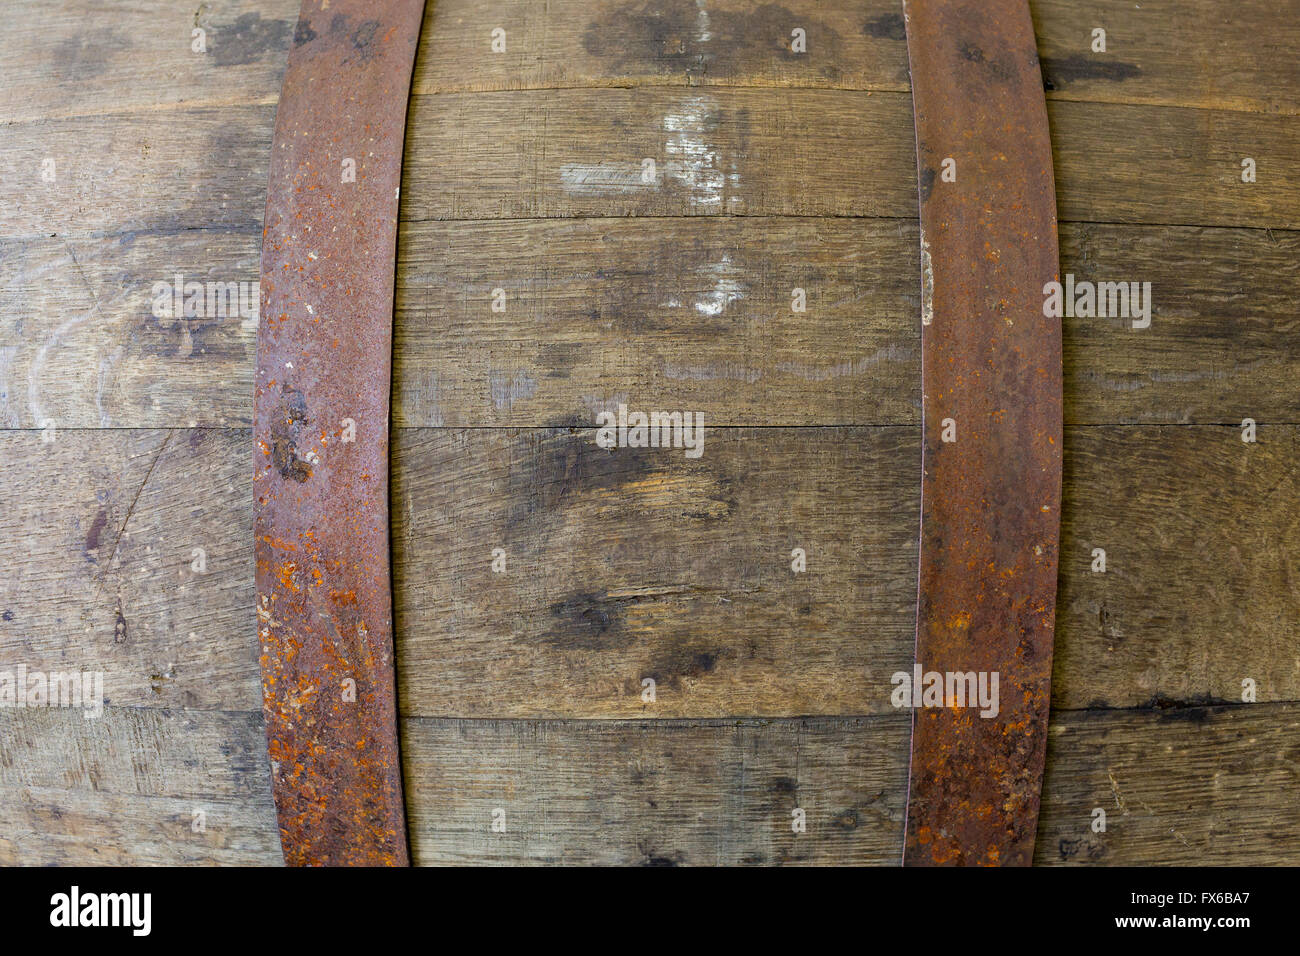 Bourbon barrel at a brewery with aged beer inside. Stock Photo